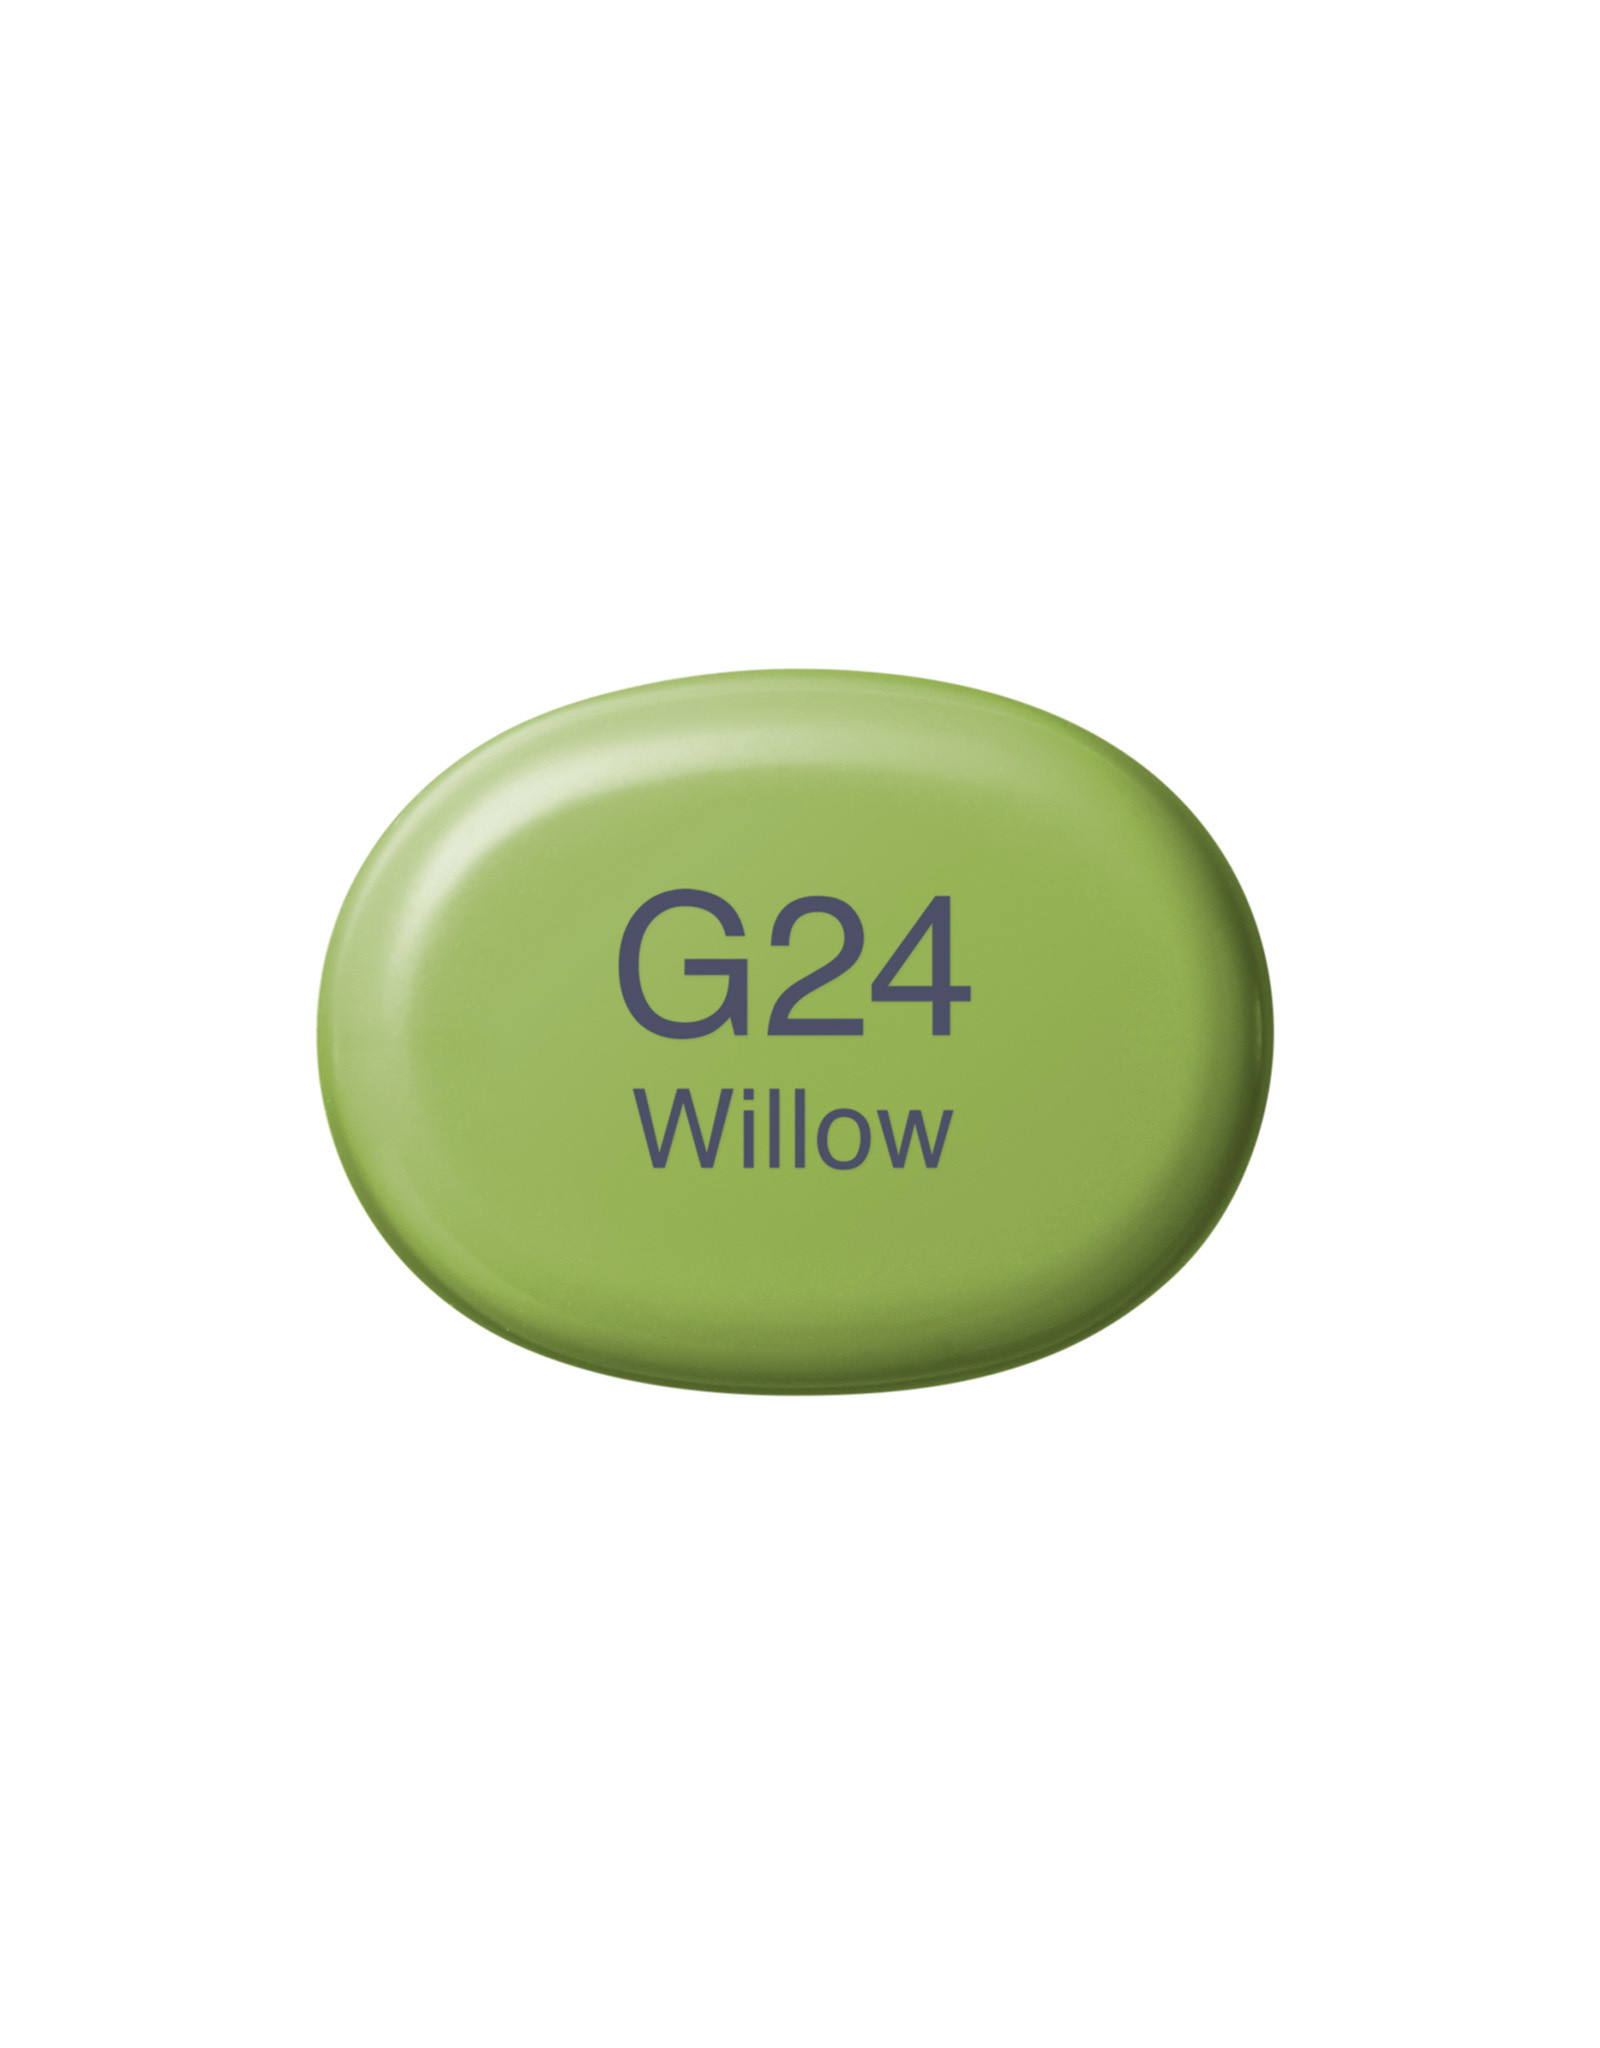 COPIC COPIC Sketch Marker G24 Willow